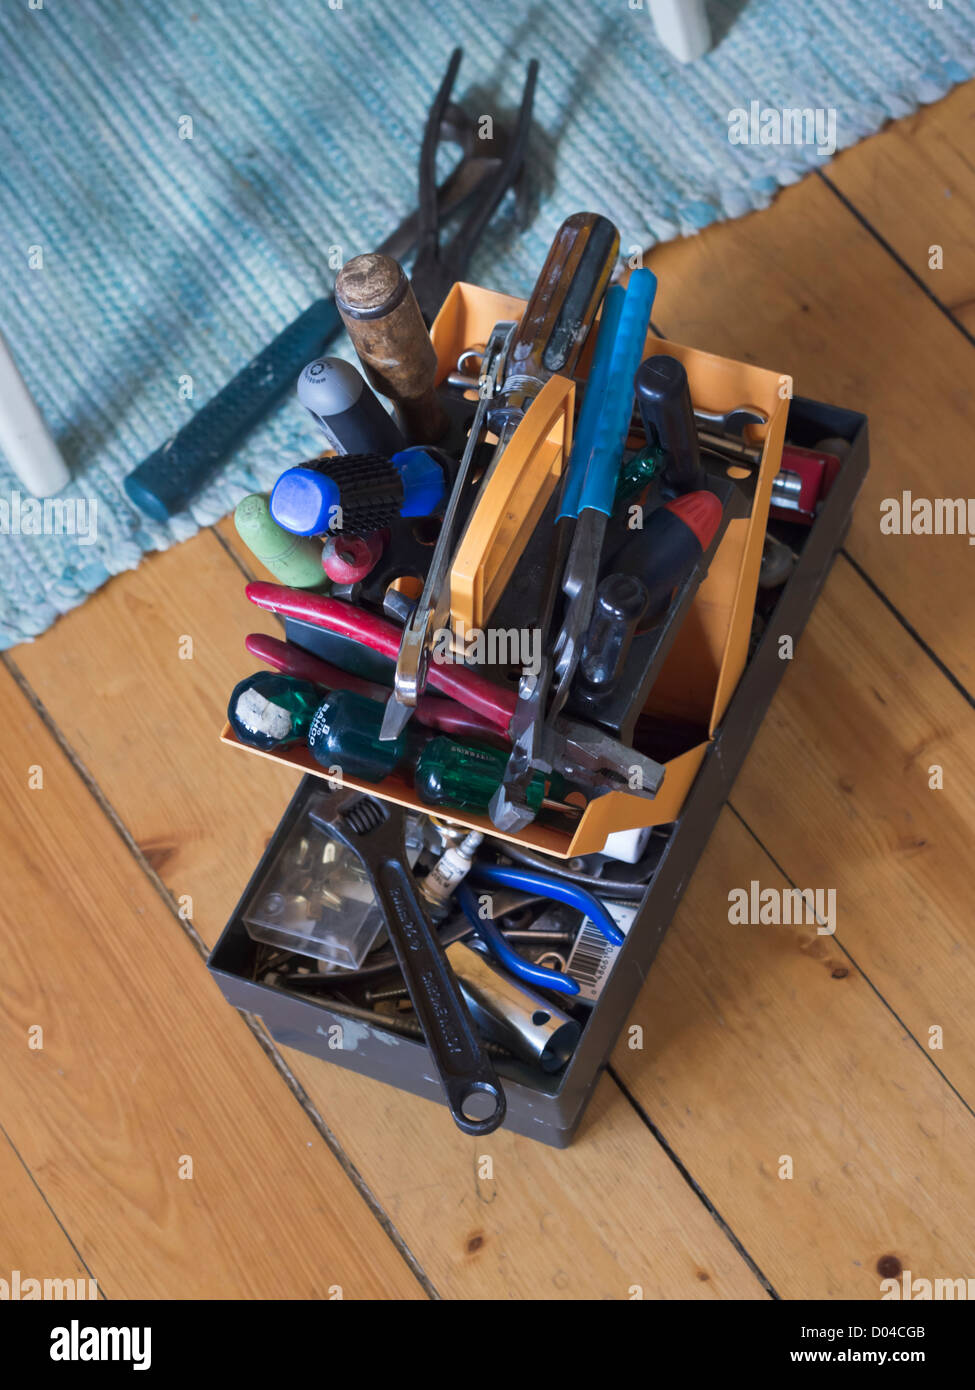 A toolbox on a wooden floor full of tools. Stock Photo